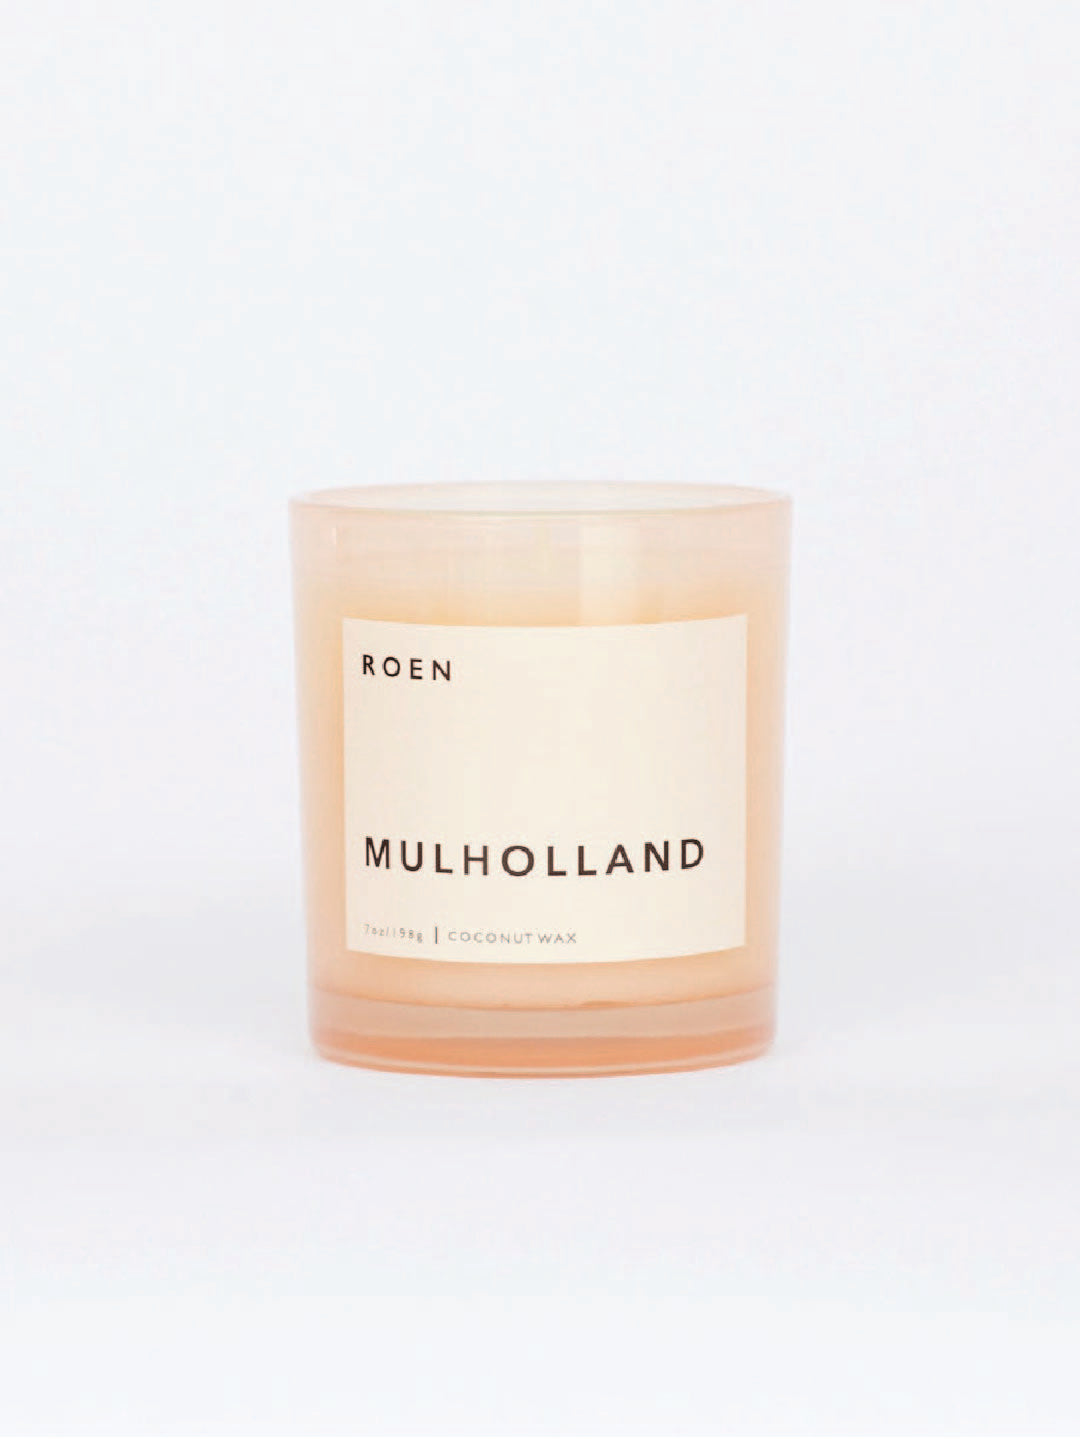 Mullholland Candle by Roen